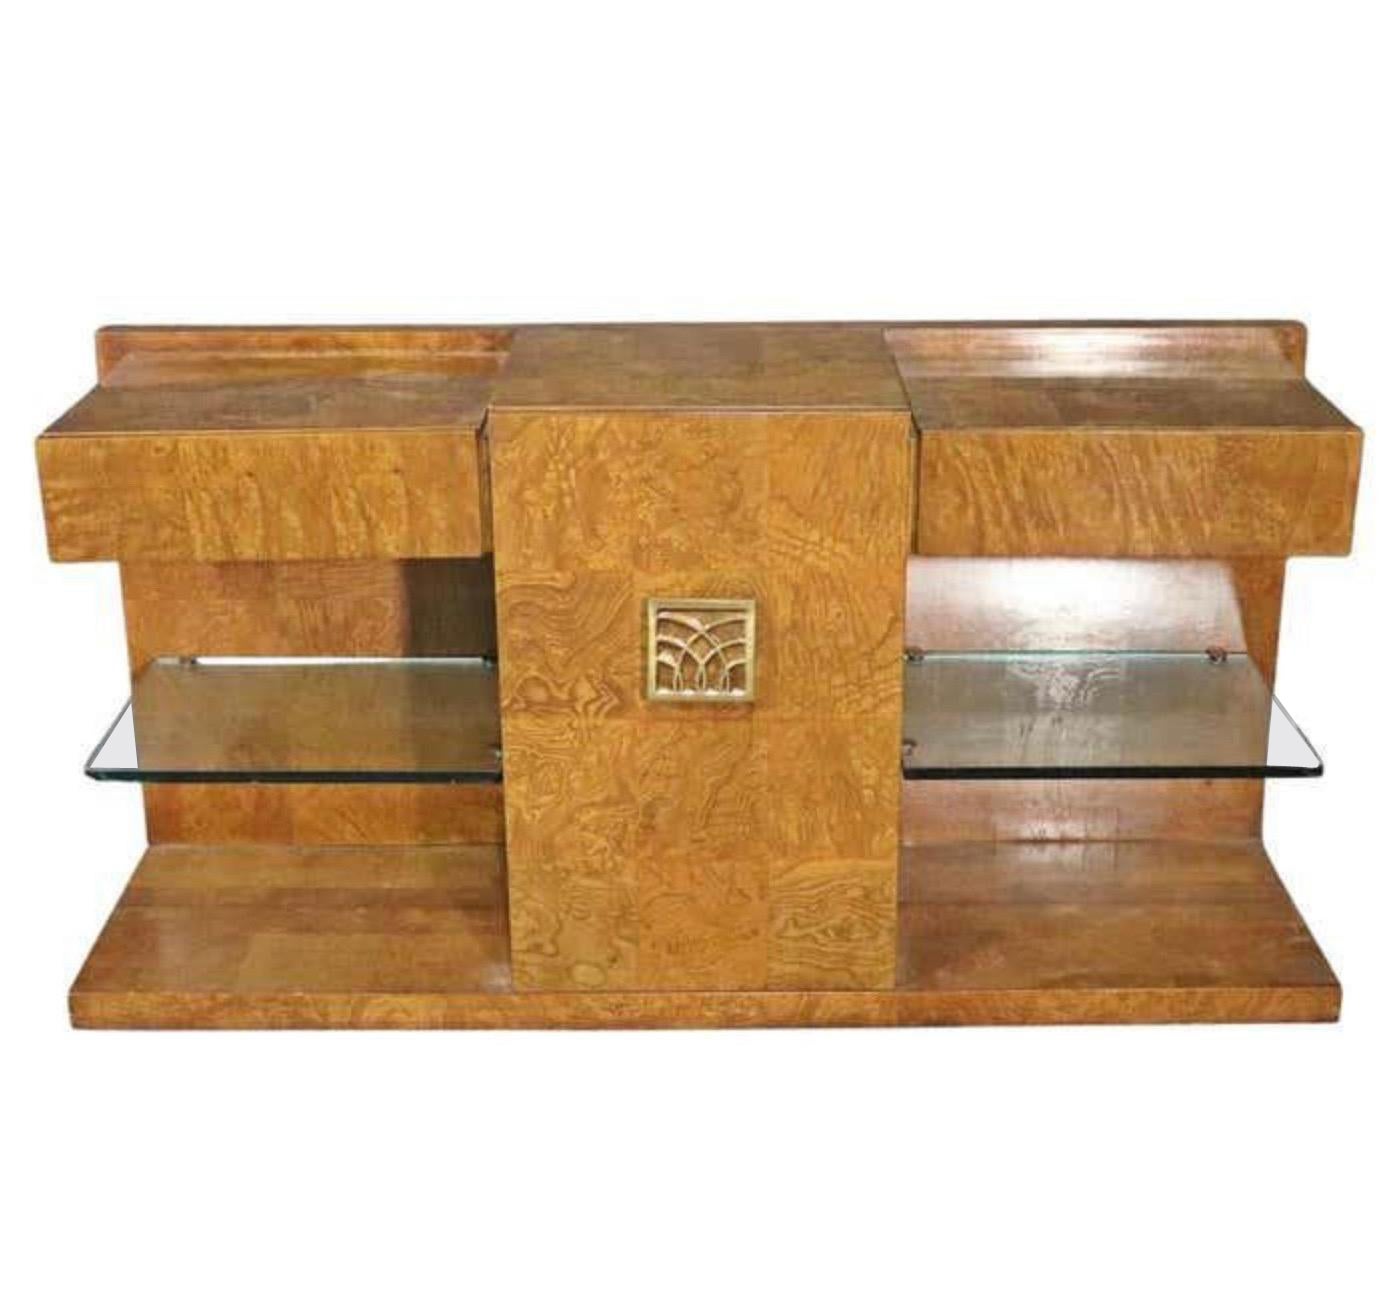 1970's Art Deco Burl Wood Floating Shelf Console by Jay Spectre for Century 